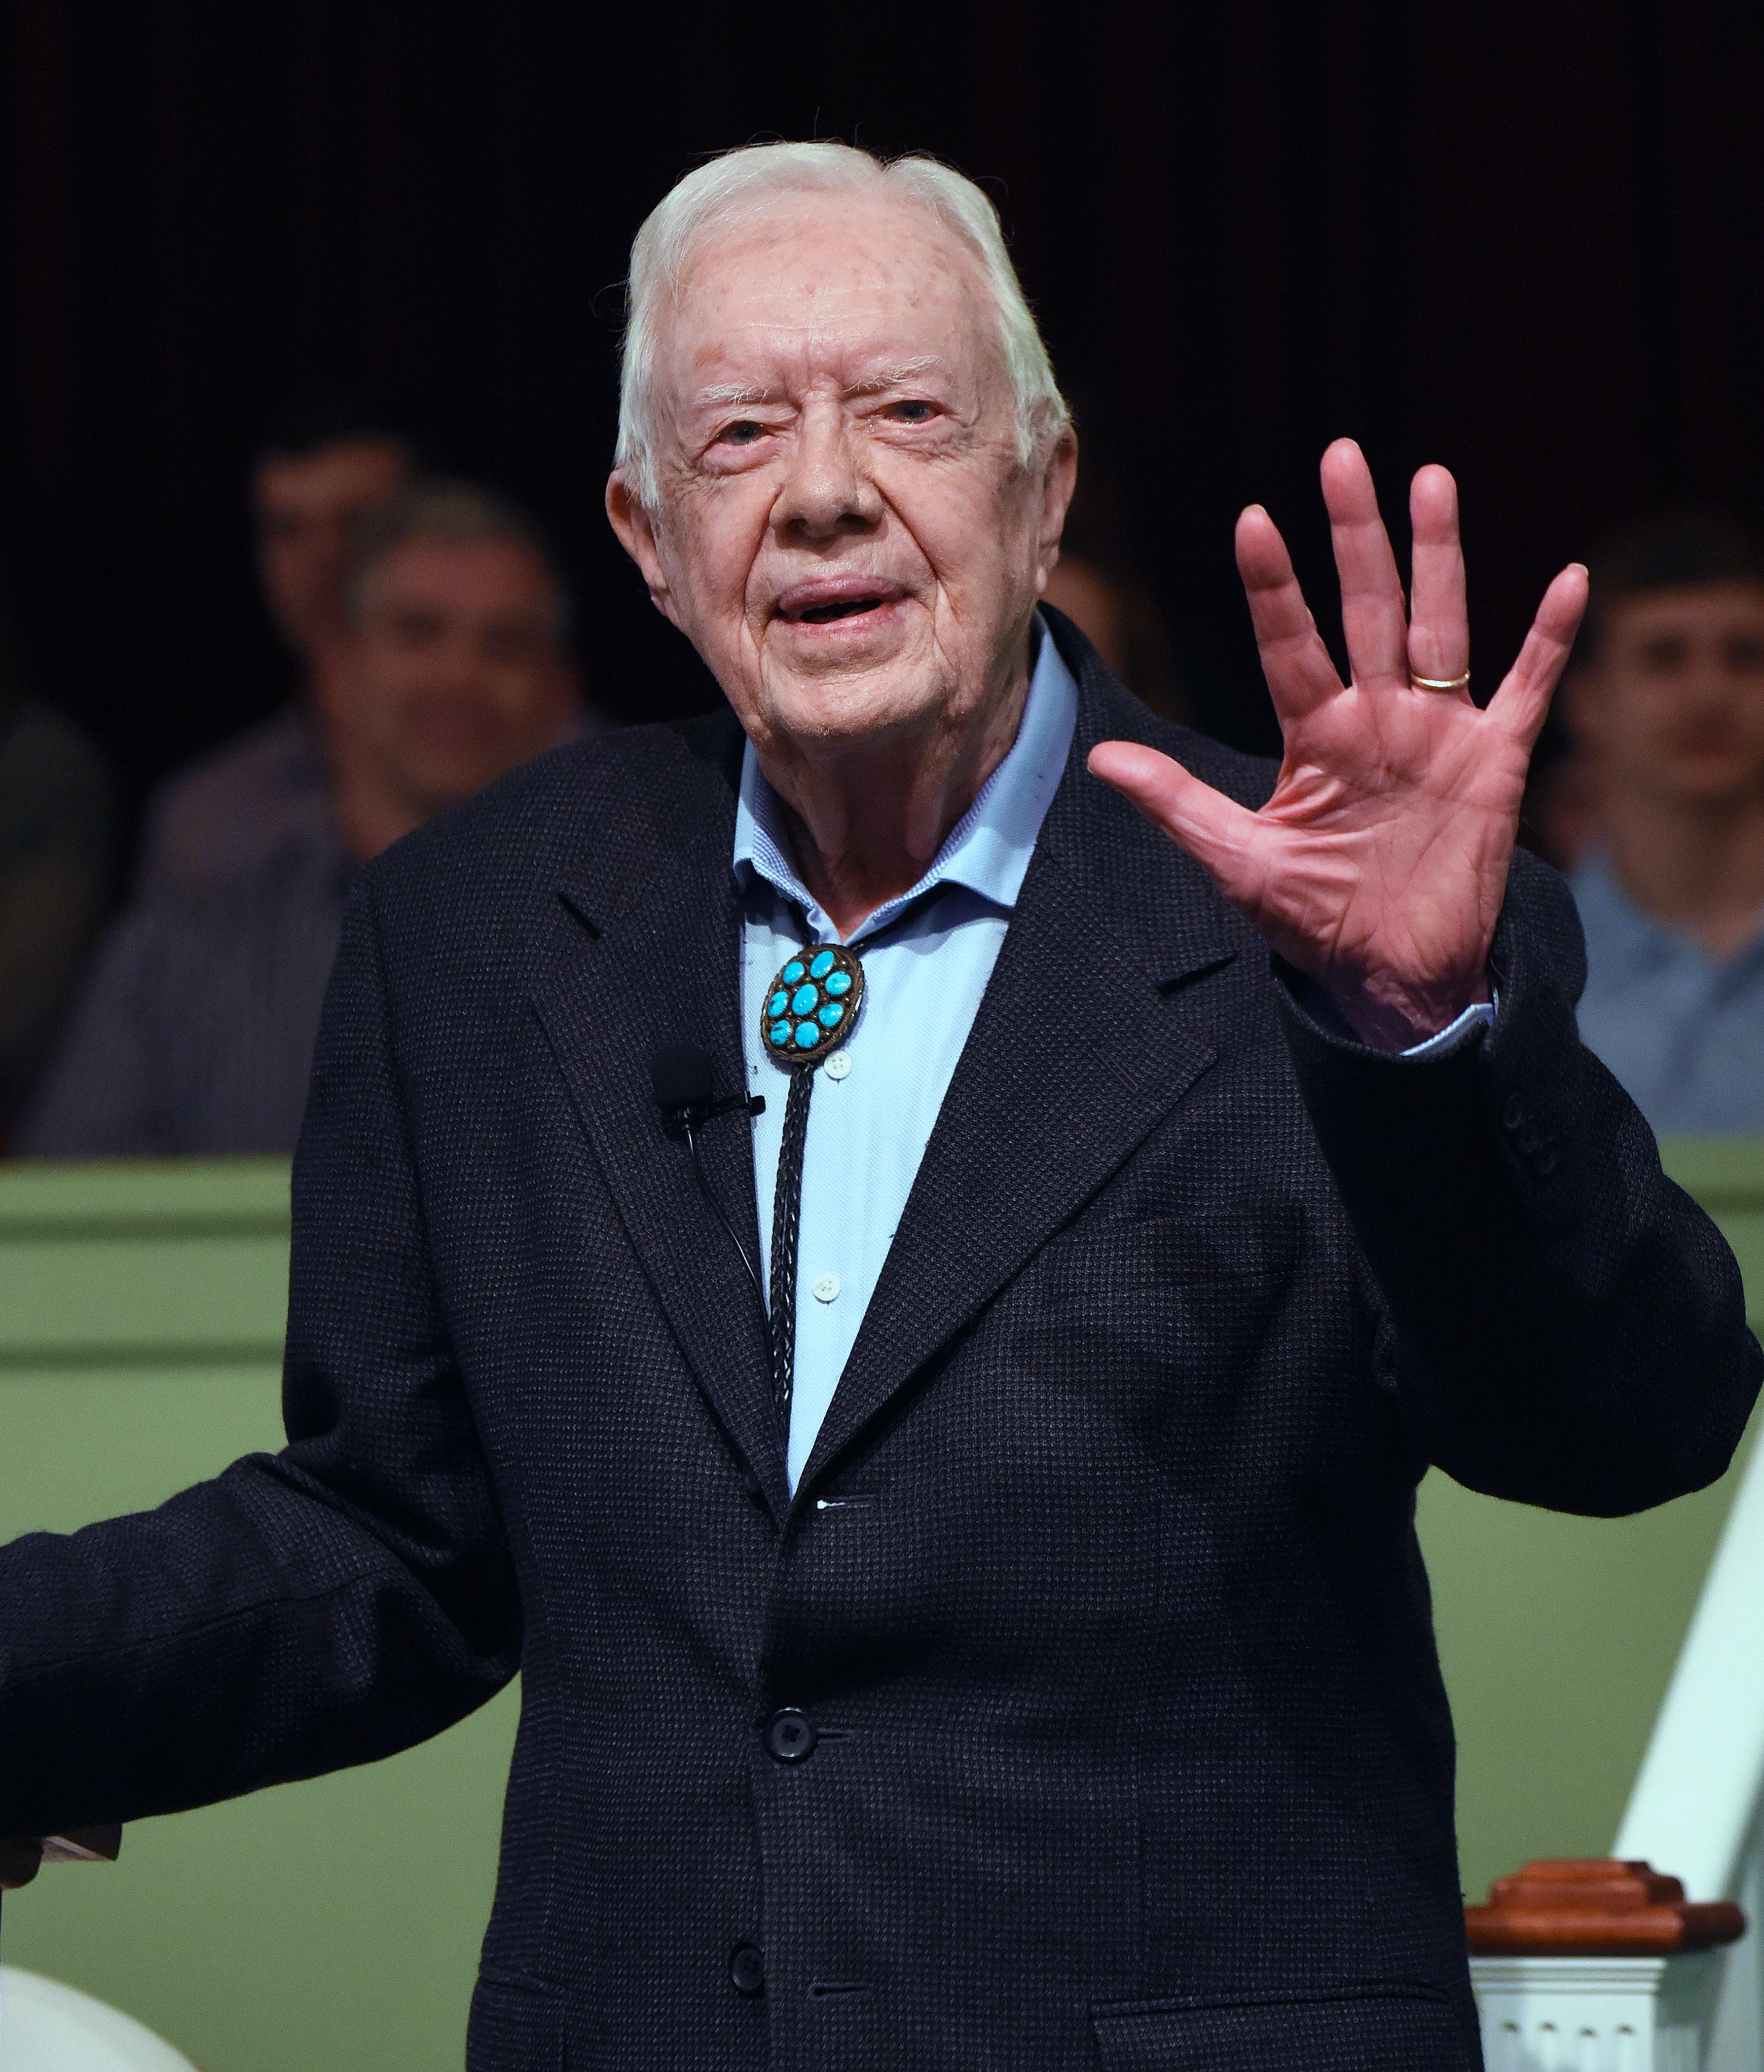 Former President Jimmy Carter addressing the congregation at Maranatha Baptist Church in Plains, Georgia on April 28, 2019 | Source: Getty Images